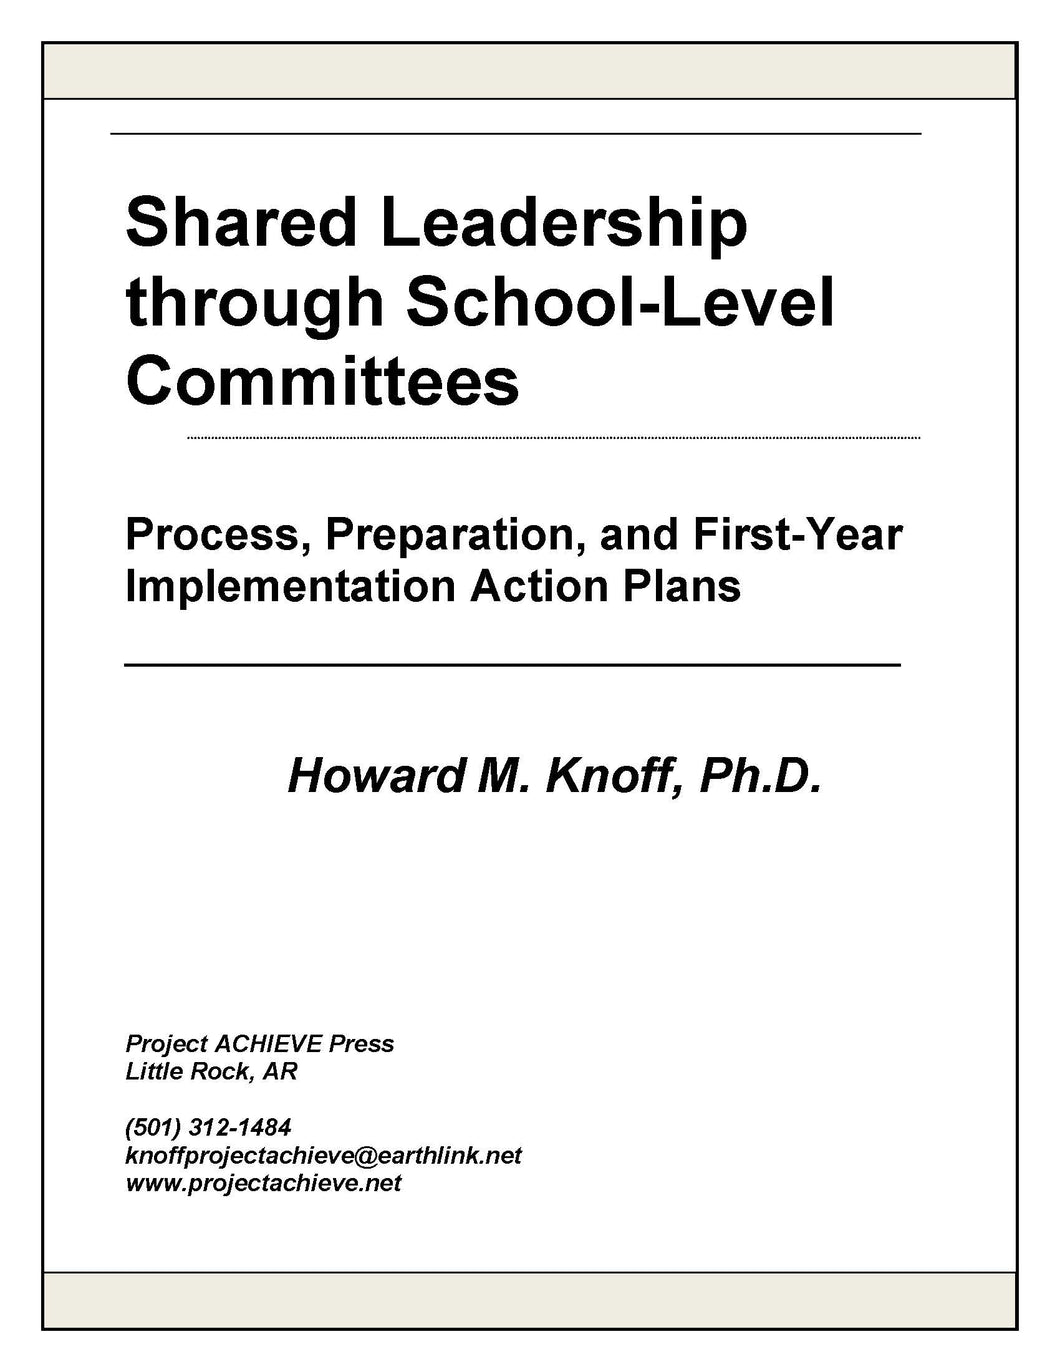 Shared Leadership through School-level Committees:  Process, Preparation, and First-Year Implementation Action Plans